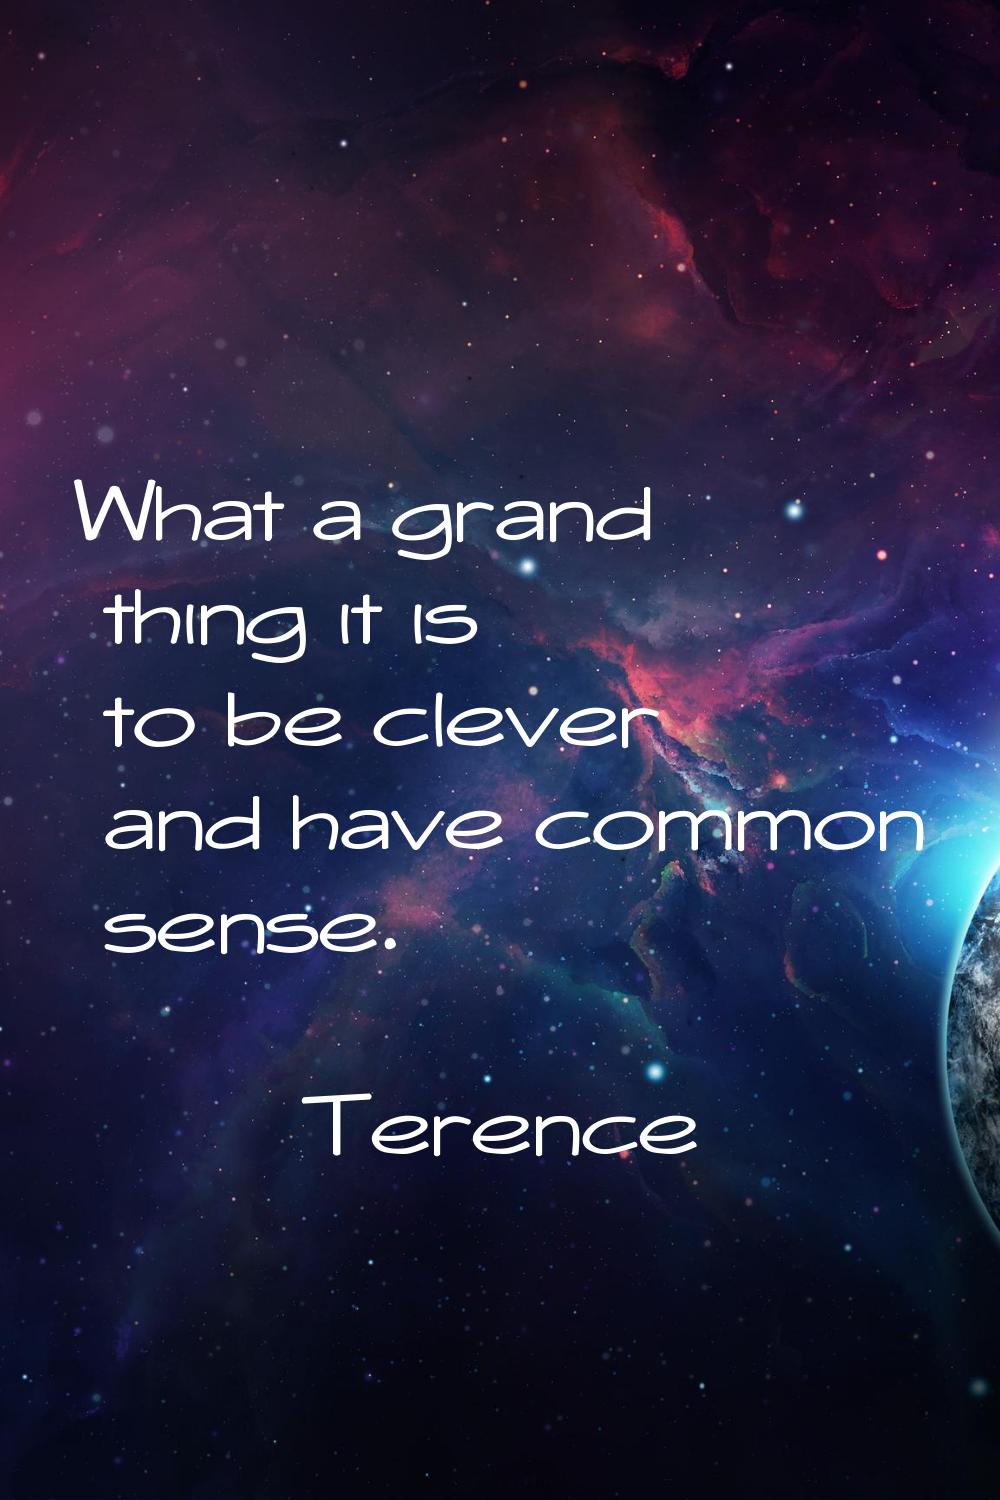 What a grand thing it is to be clever and have common sense.